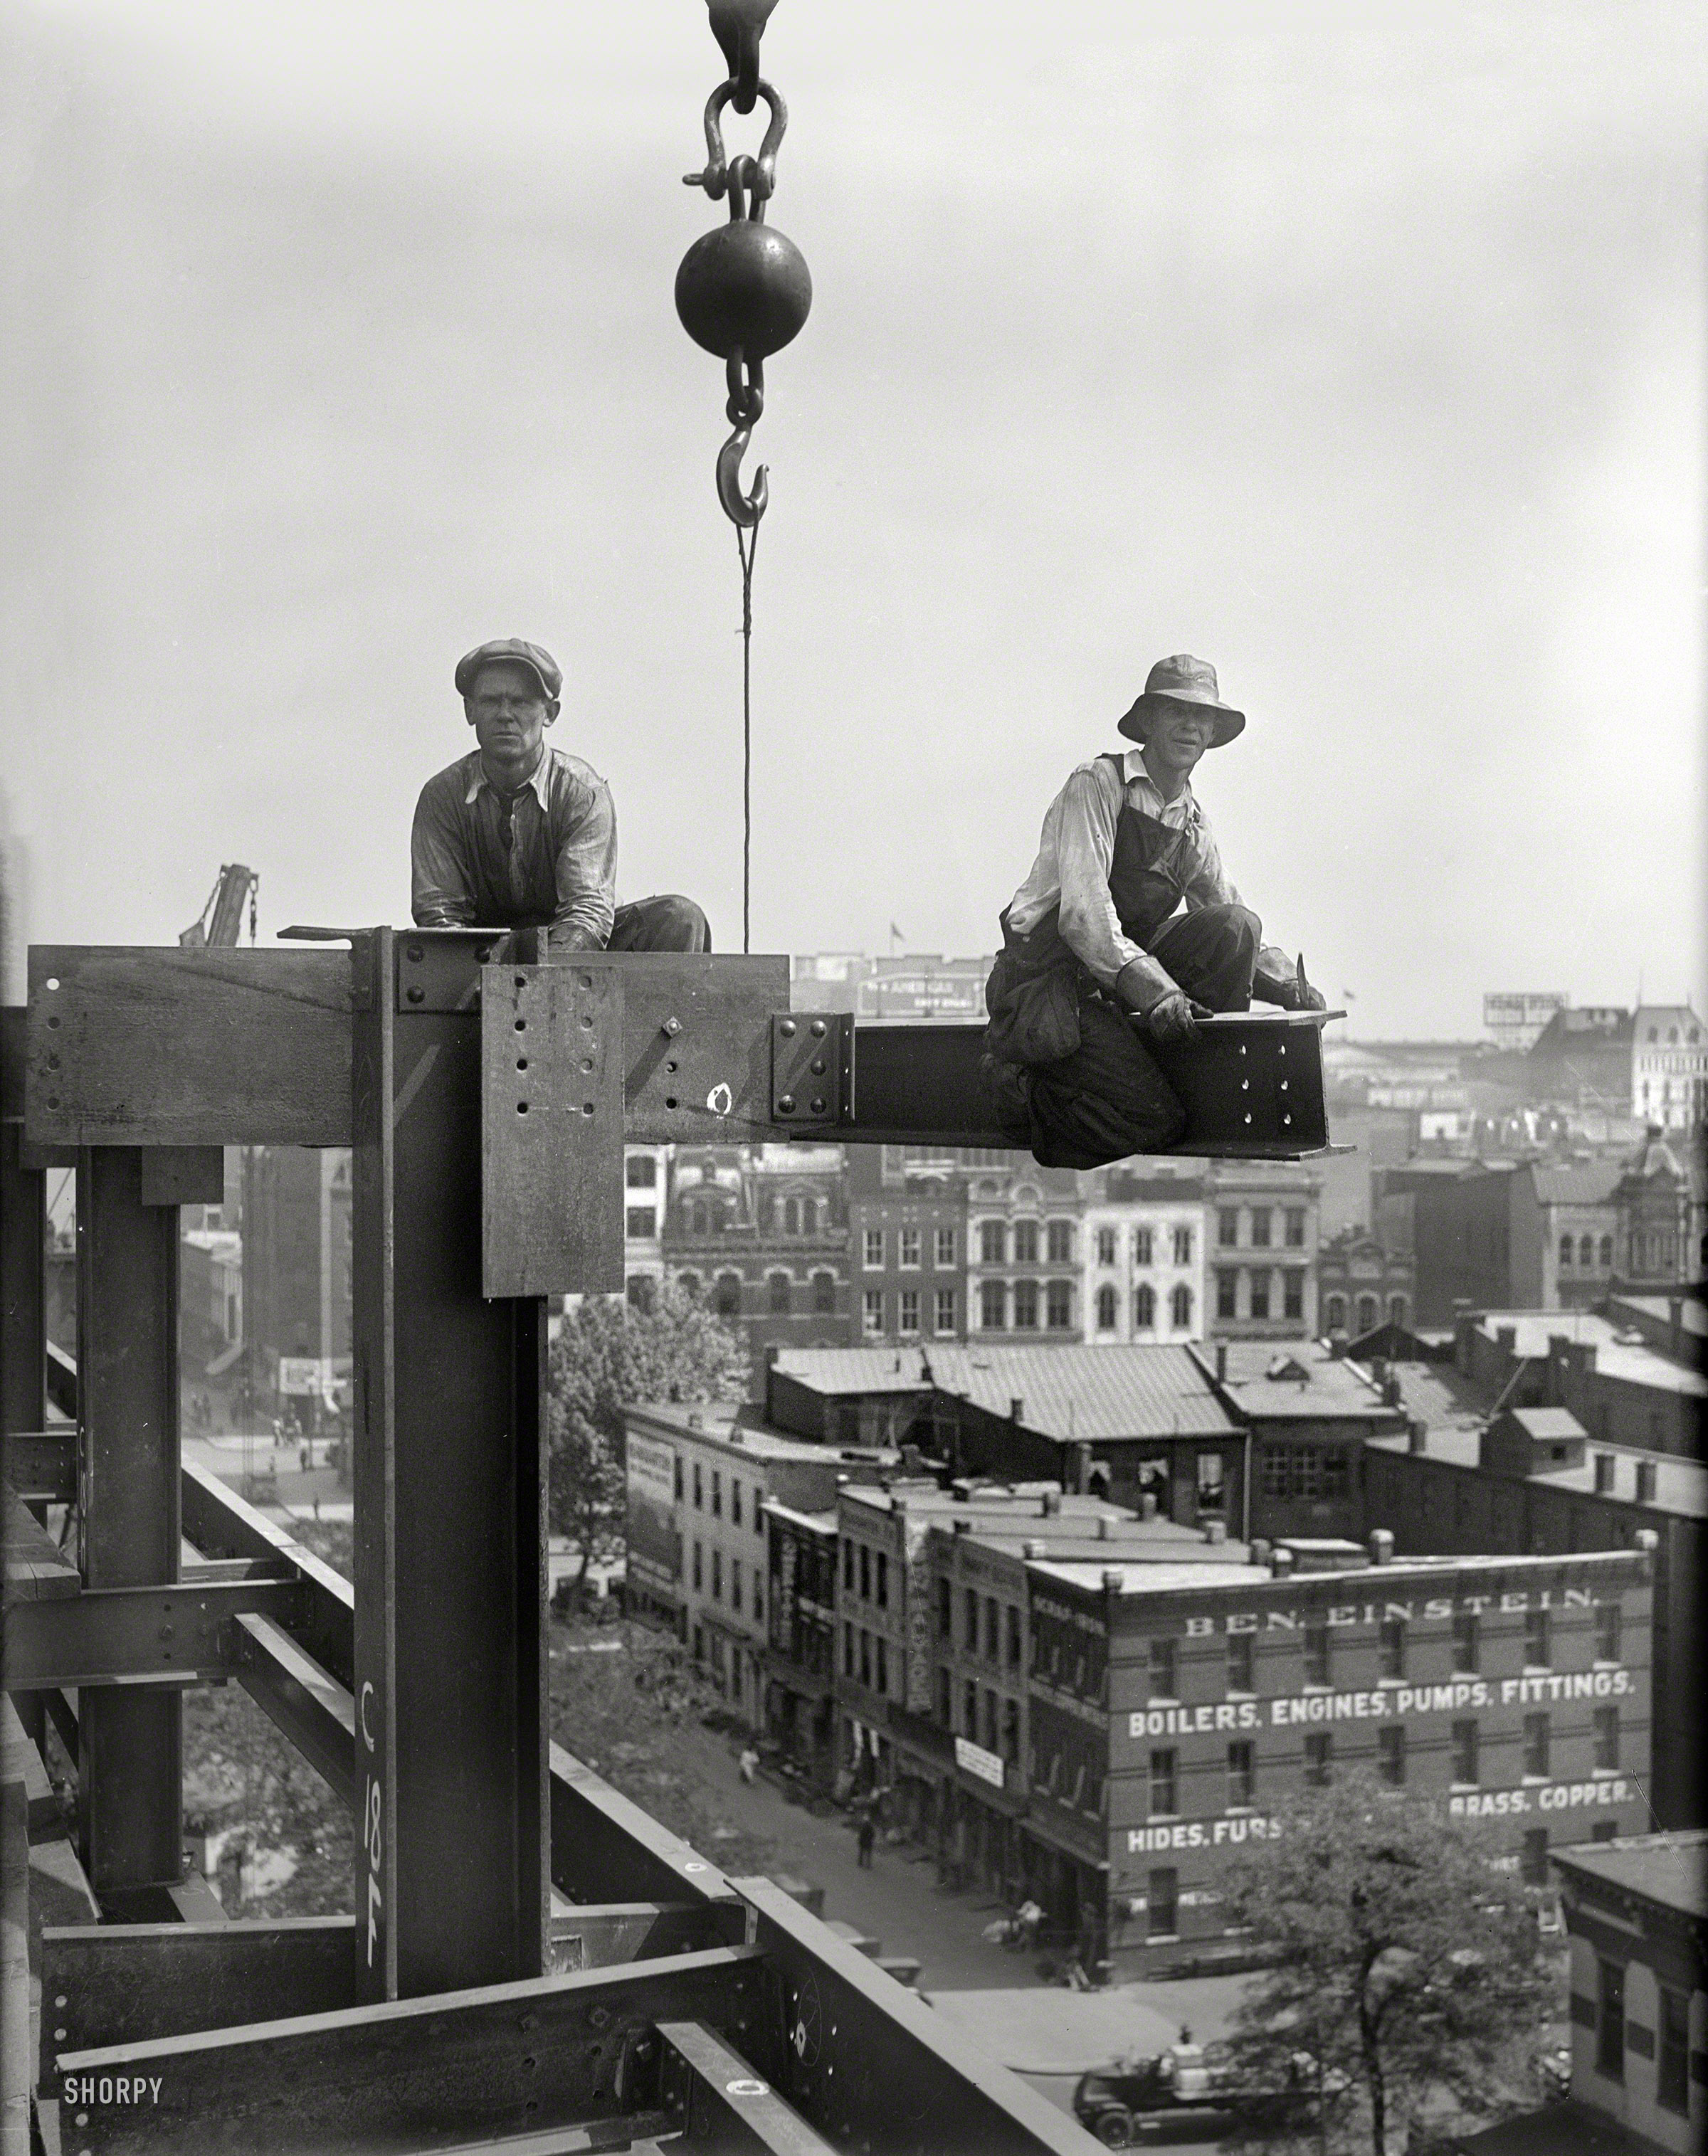 Summer 1929. Washington, D.C. "Workers on building under construction." Harris & Ewing Collection glass negative. View full size.